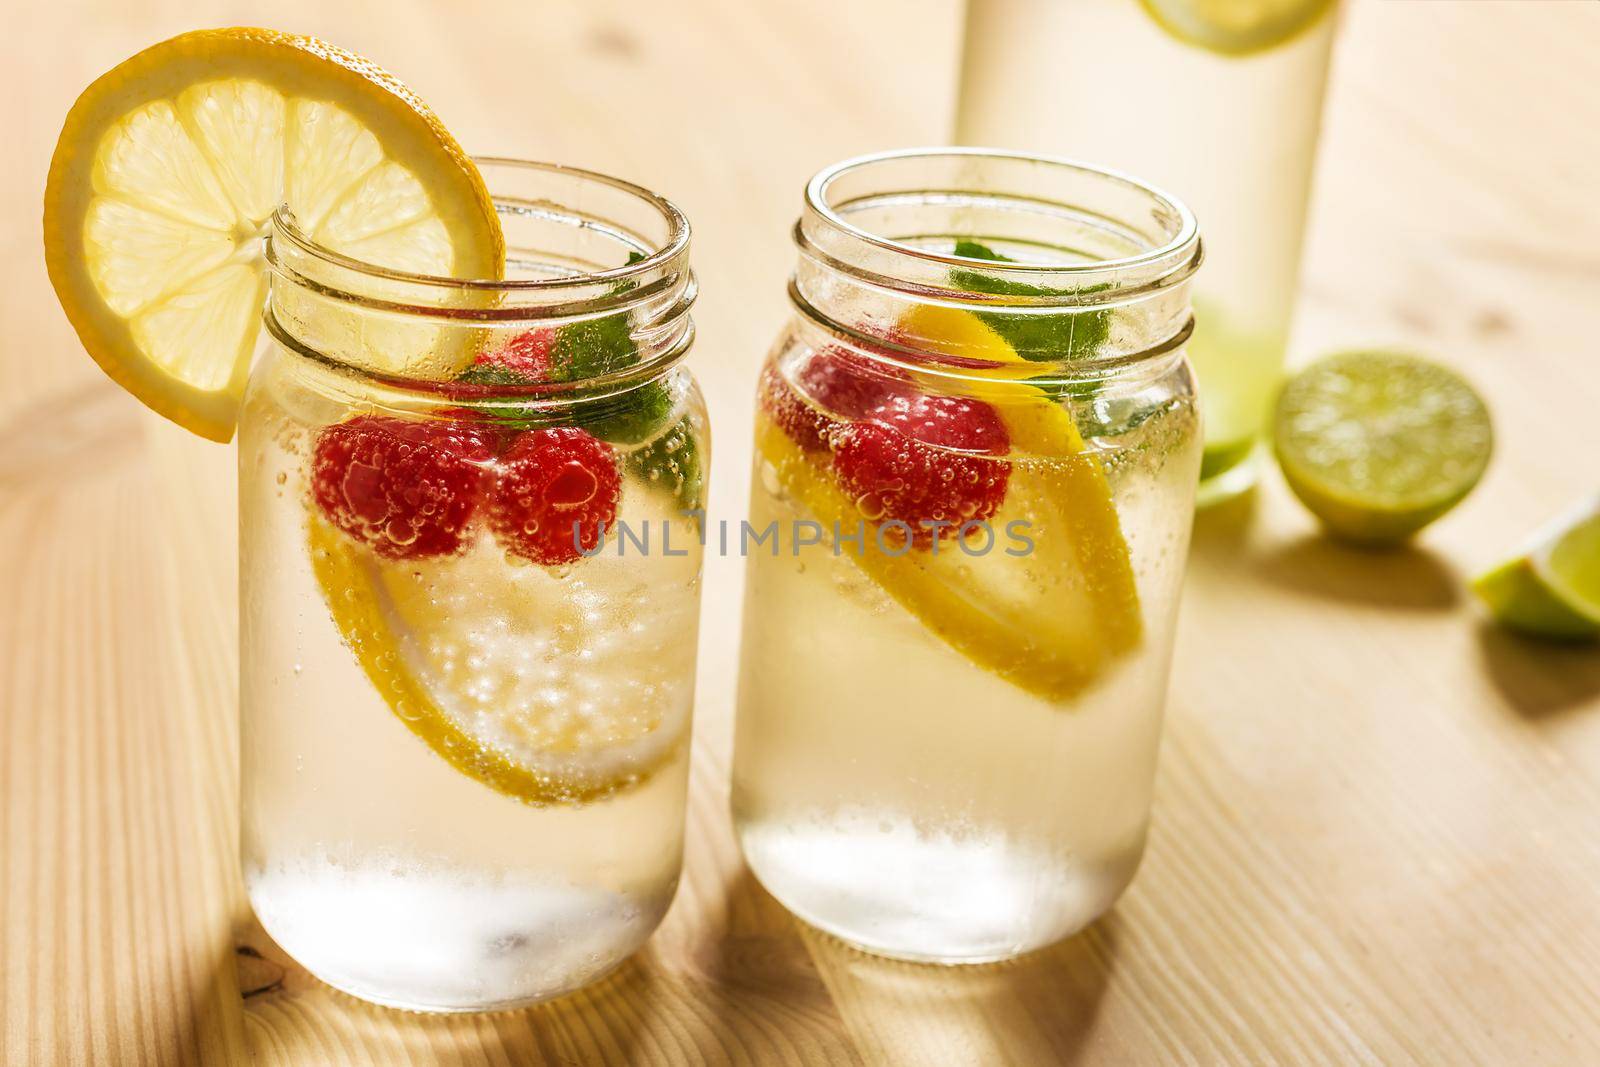 two glass jars with cold water, slices of lime, lemon, mint and red berries illuminated by sunlight on a wooden table with a bottle and pieces of citrus, summer refreshments background, copy space